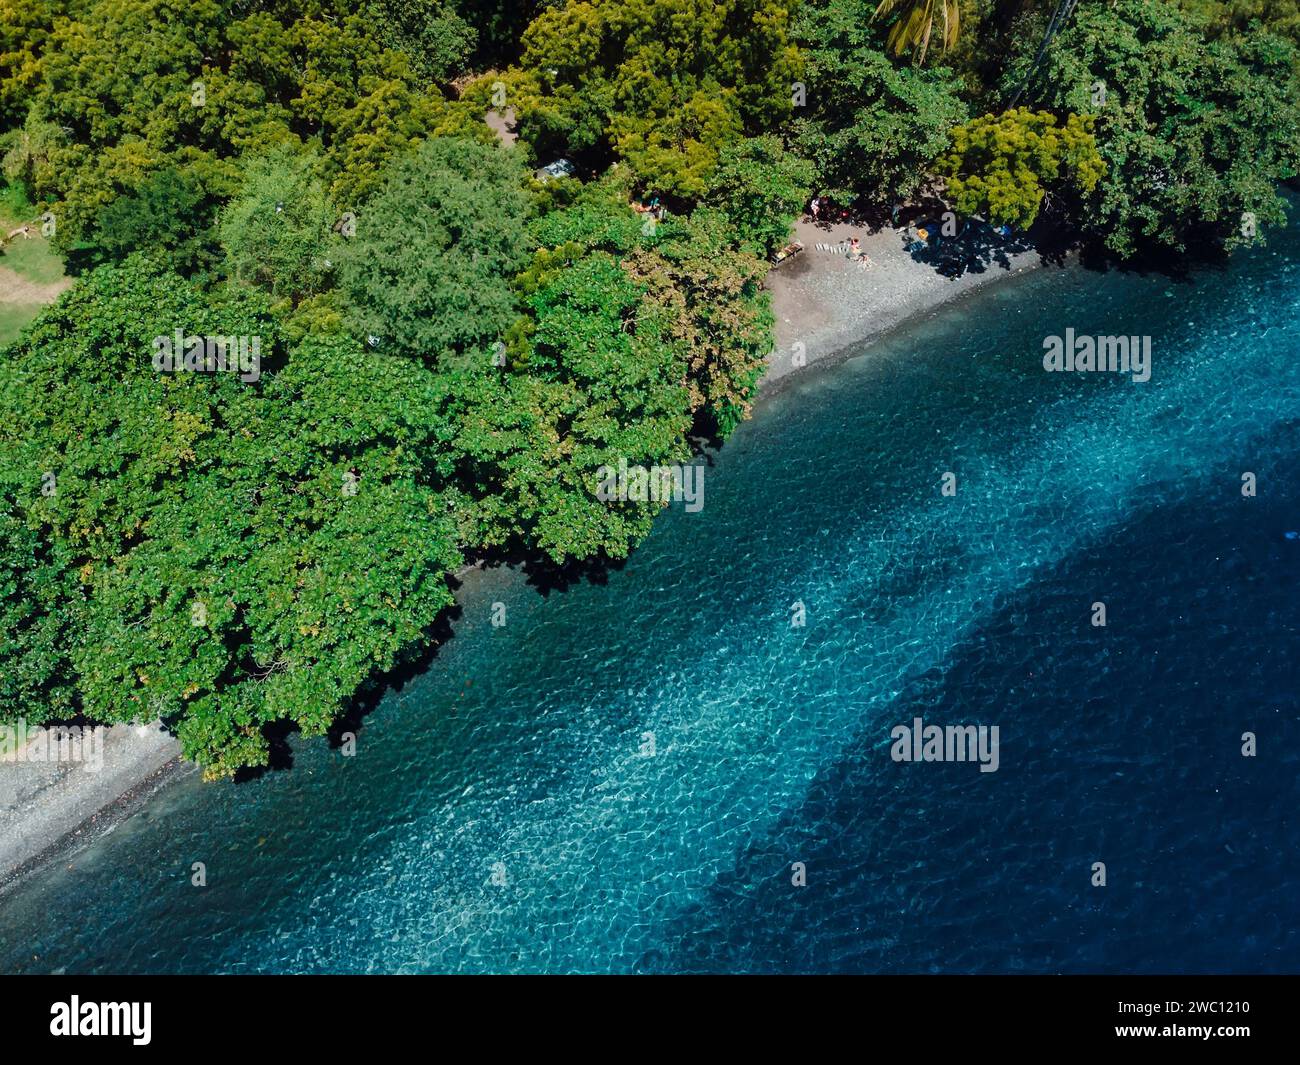 Aerial view of beach coastline with transparent blue ocean and trees. Stock Photo